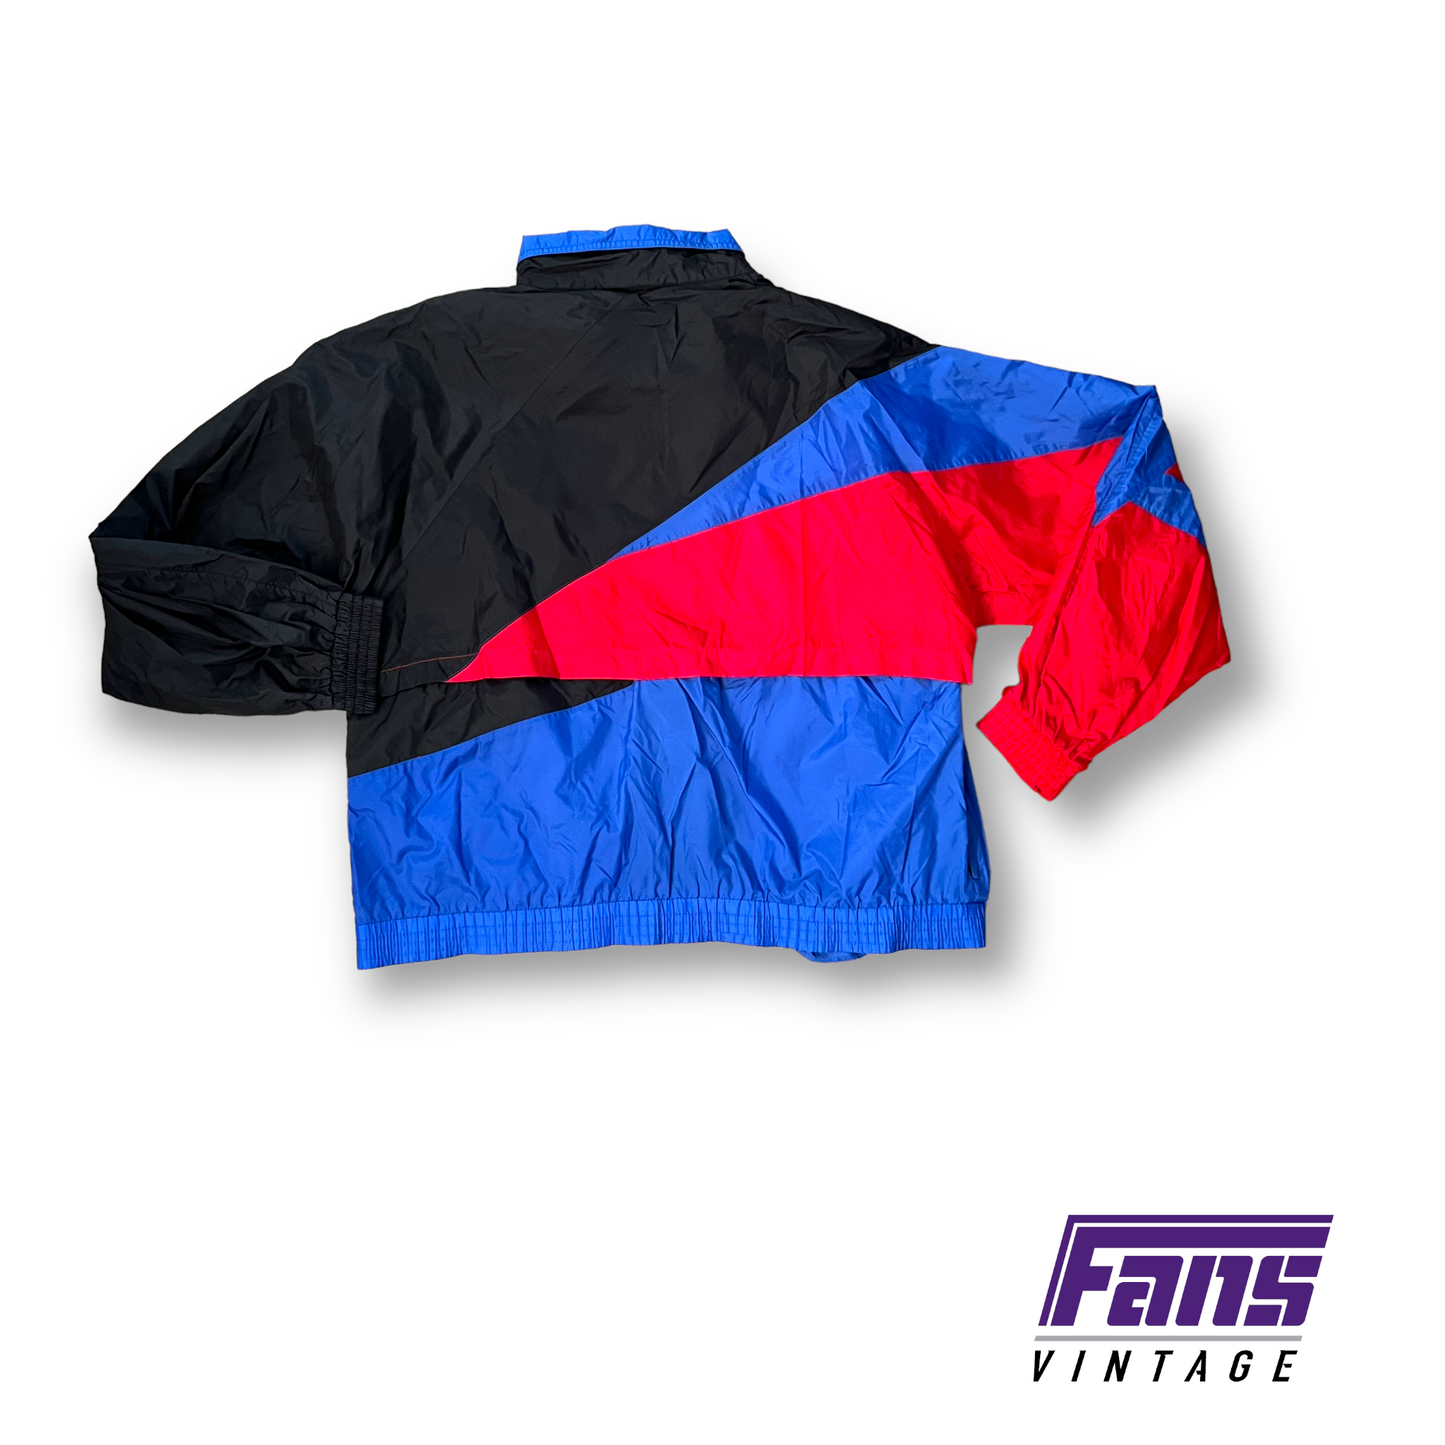 90s Vintage Windbreaker in USA World Cup Style